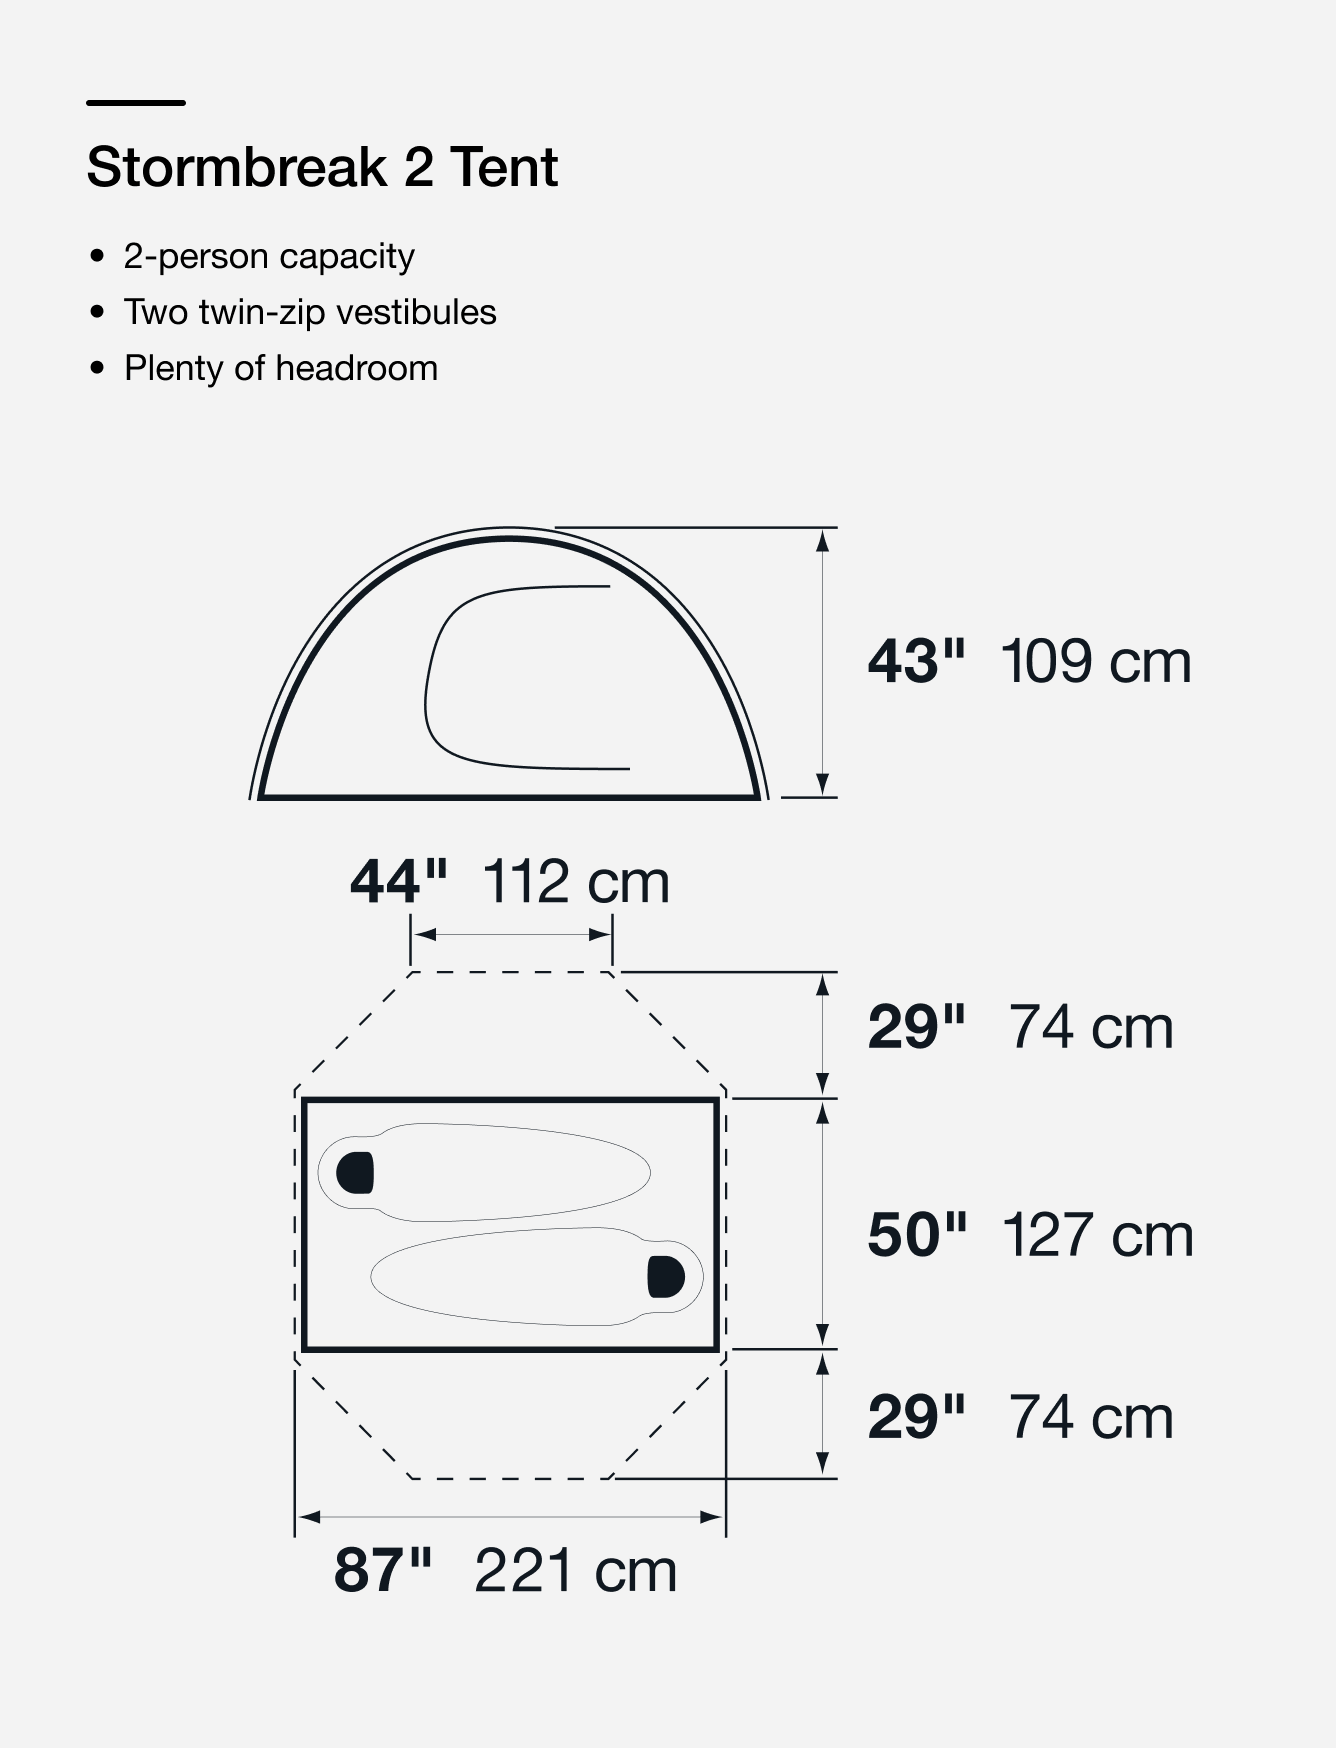 Product imagery of the Stormbreak Tent from The North Face with features called out in text overlay. 